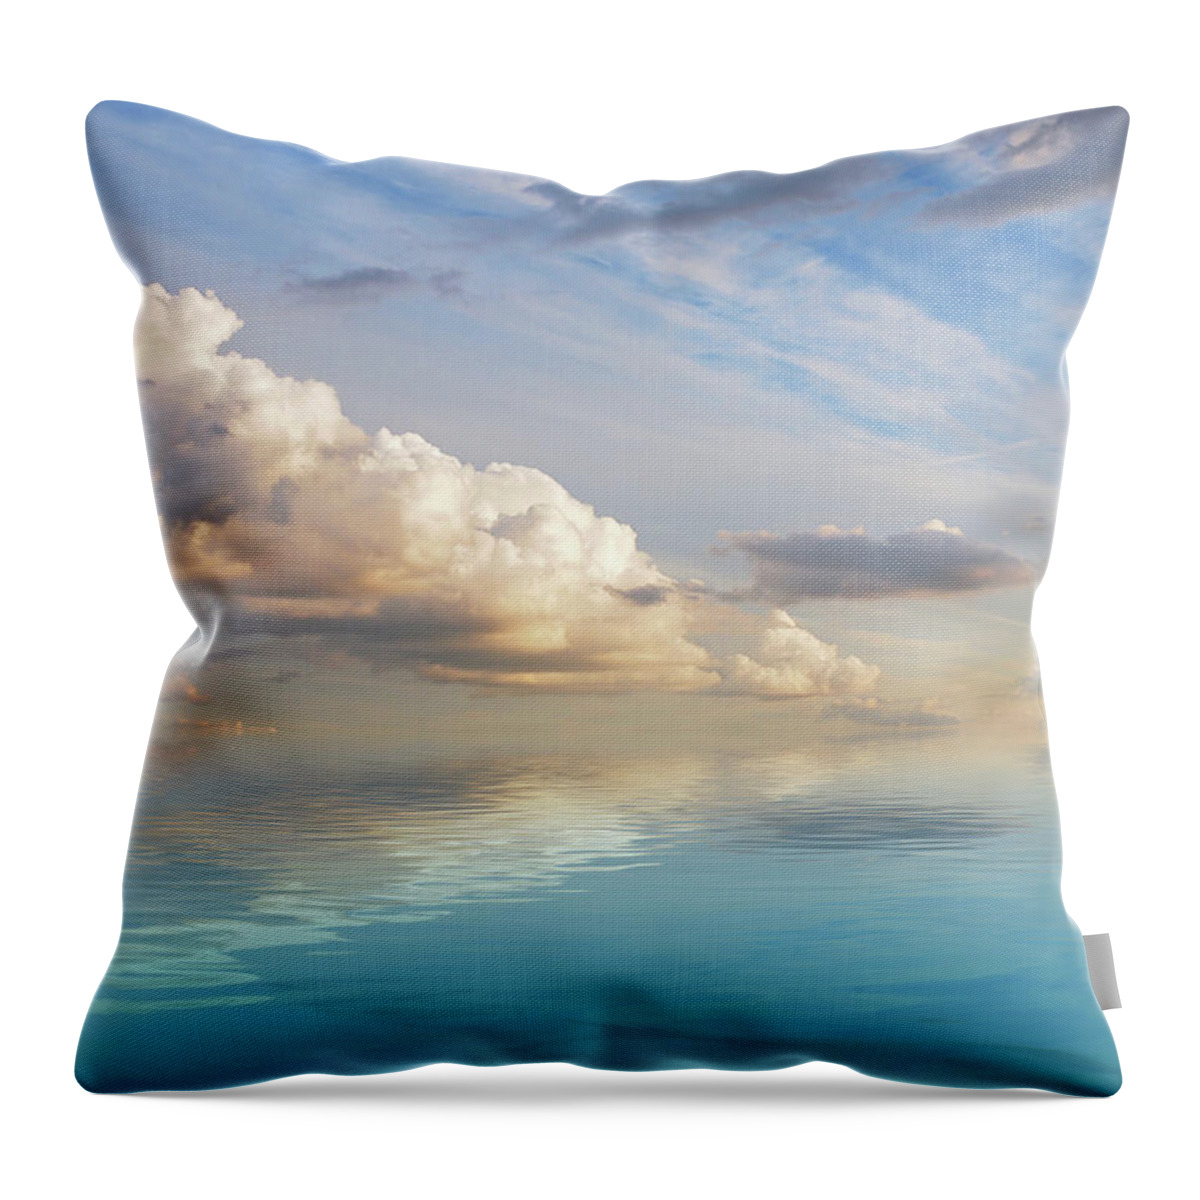 Cloudscape Throw Pillow featuring the photograph Cool Reflections by Gill Billington